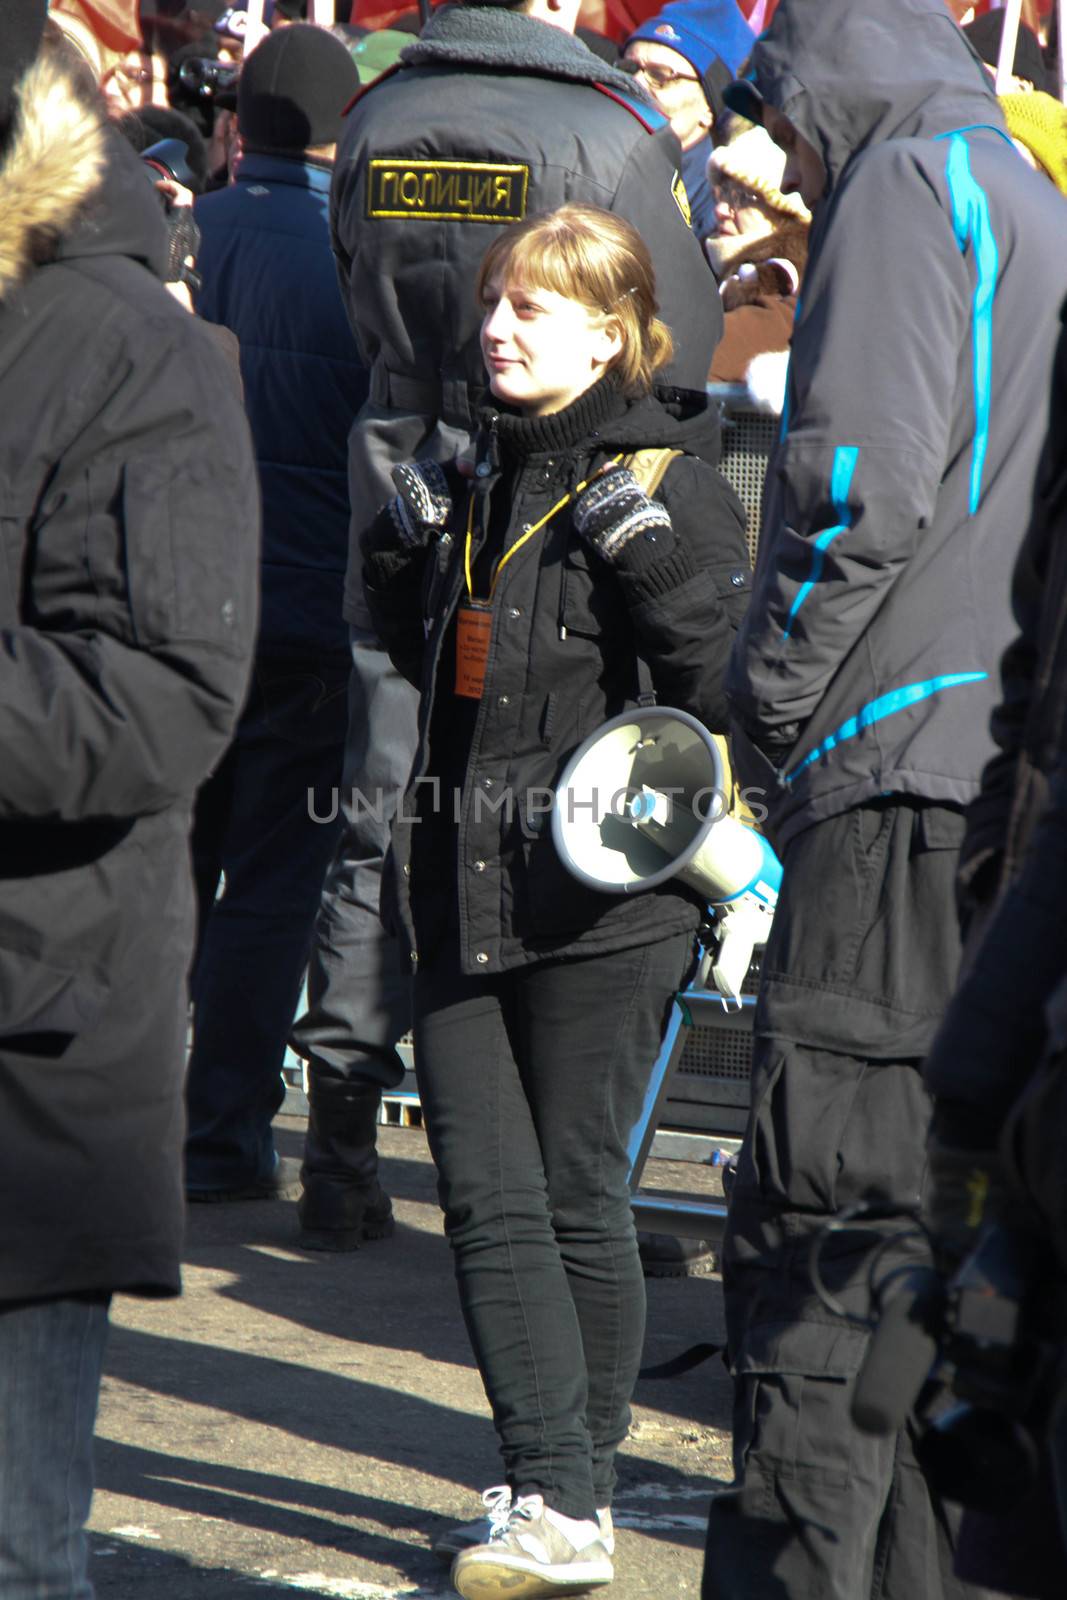 Moscow, Russia - March 10, 2012. Civil society activist Anastasia Rybachenko on an opposition rally on election results